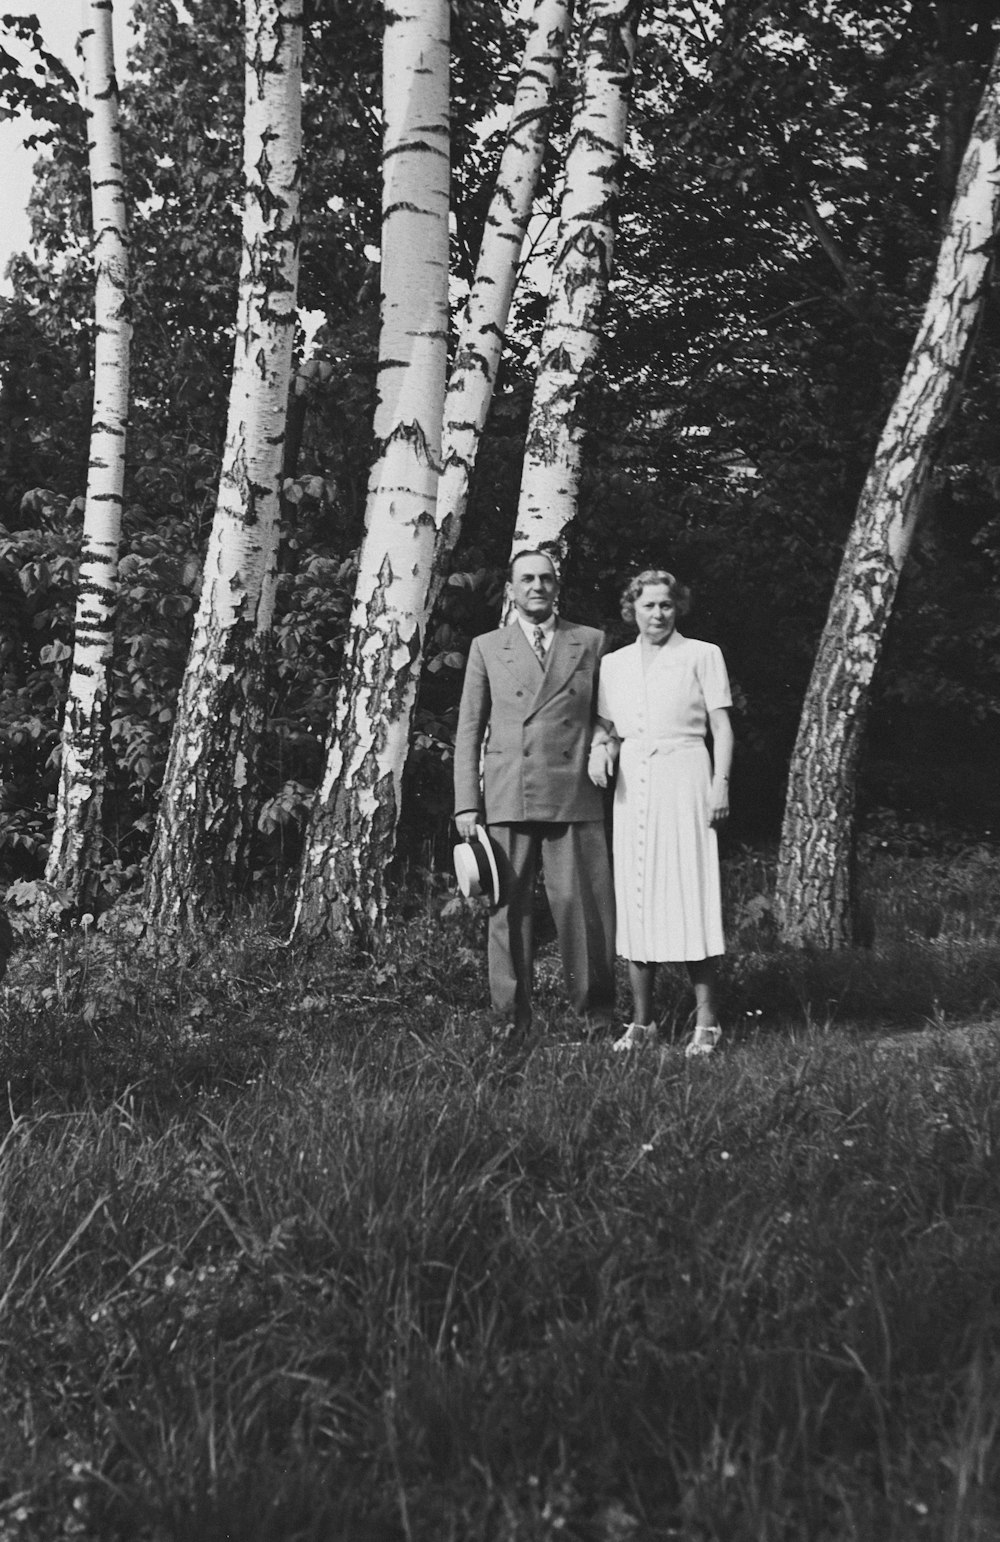 an old photo of a man and a woman standing in front of some trees